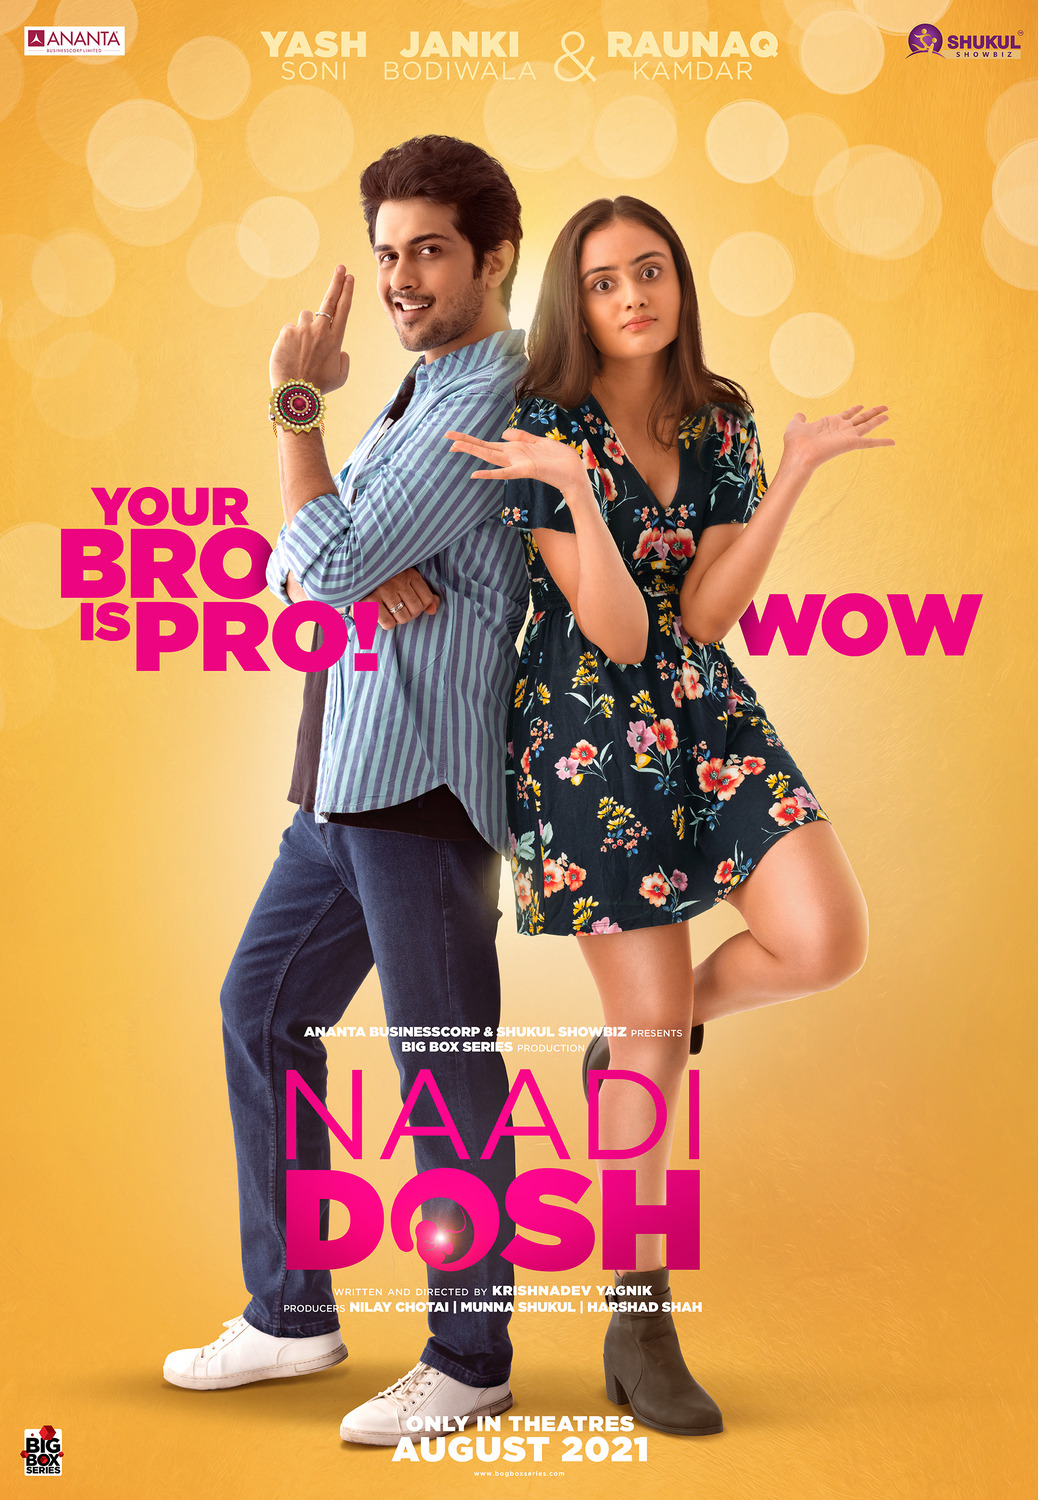 Extra Large Movie Poster Image for Naadi Dosh (#2 of 4)